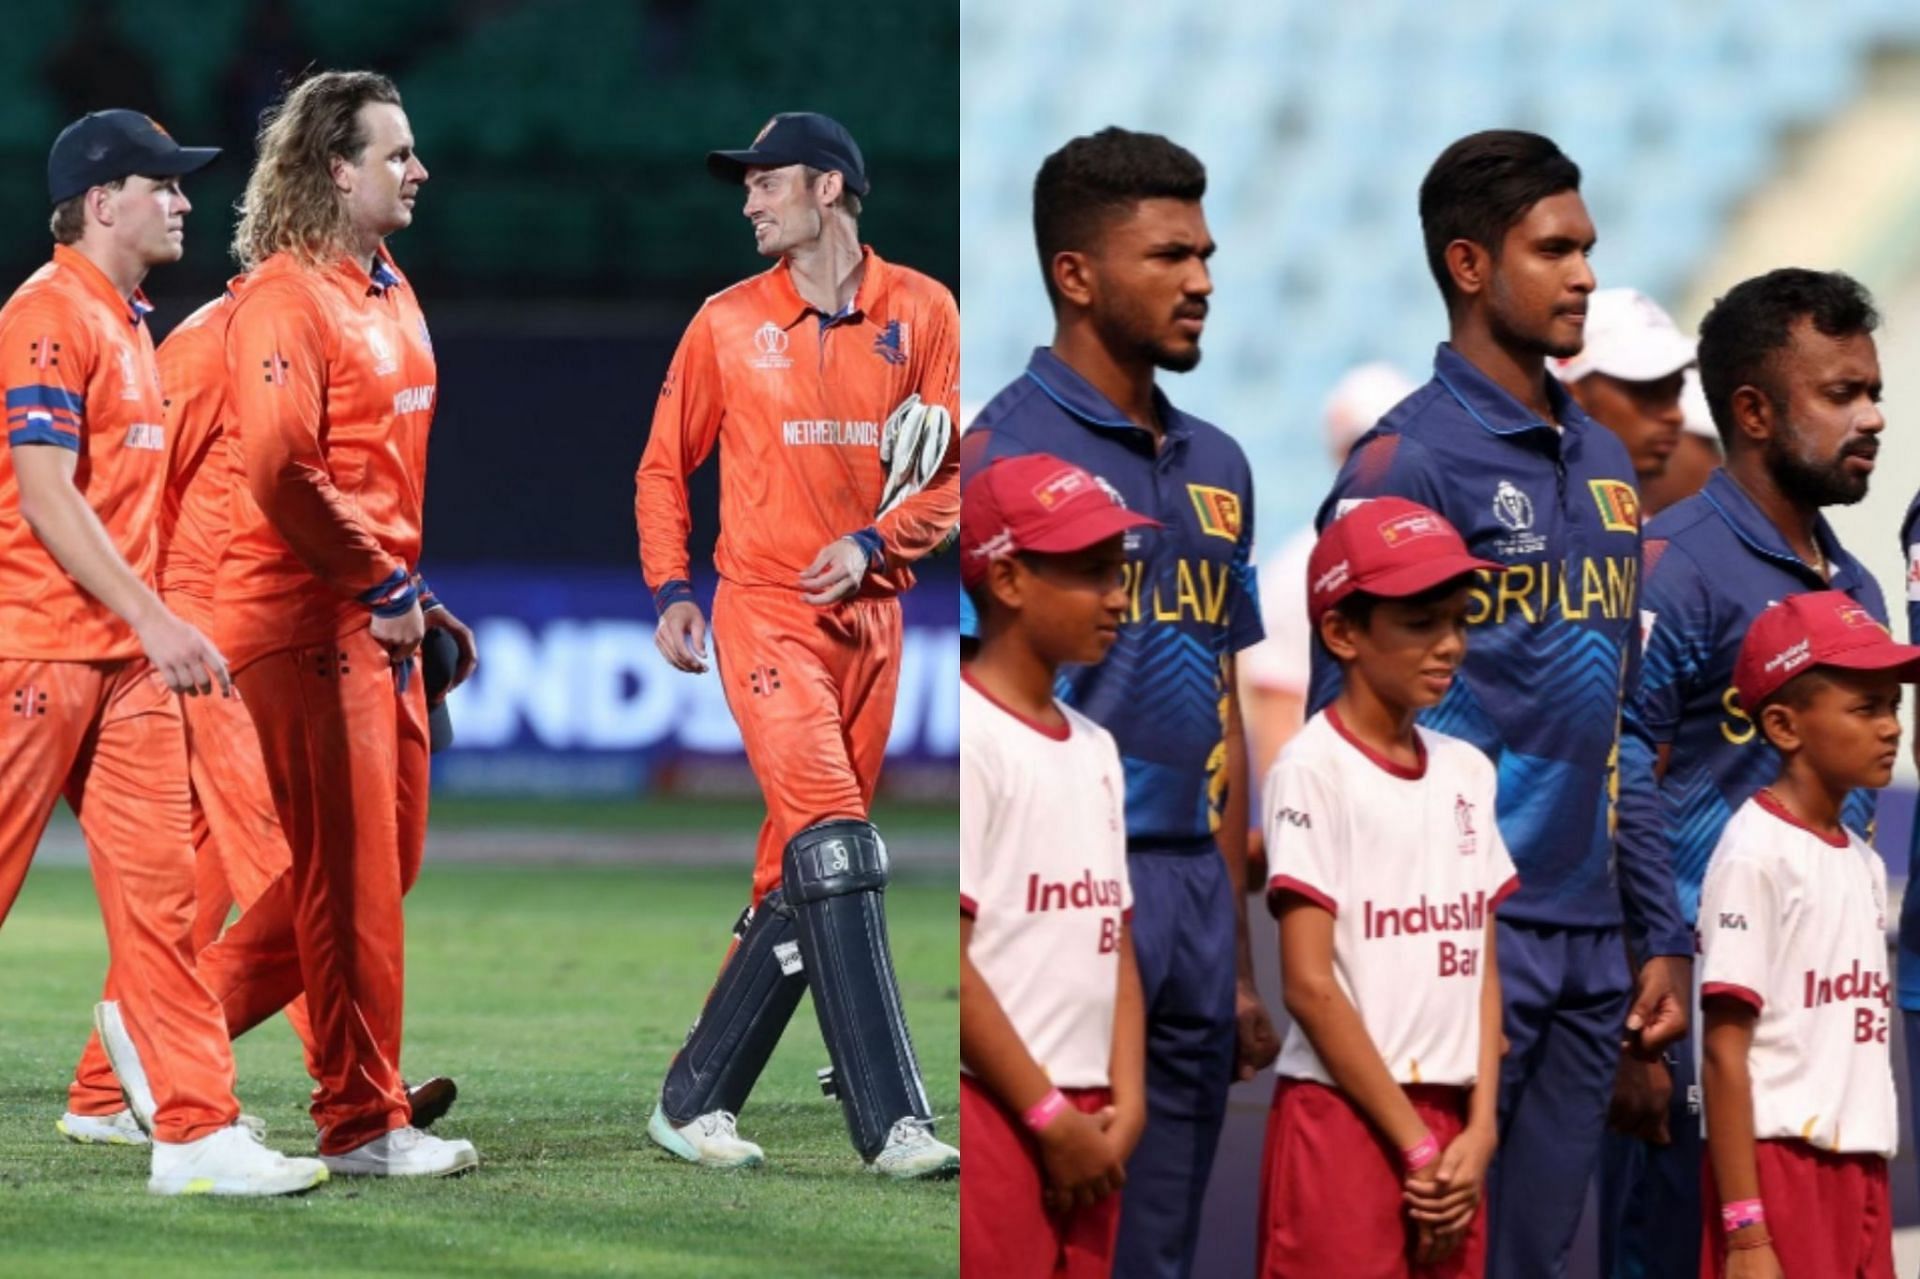 Netherlands will face Sri Lanka on Saturday [Getty Images]